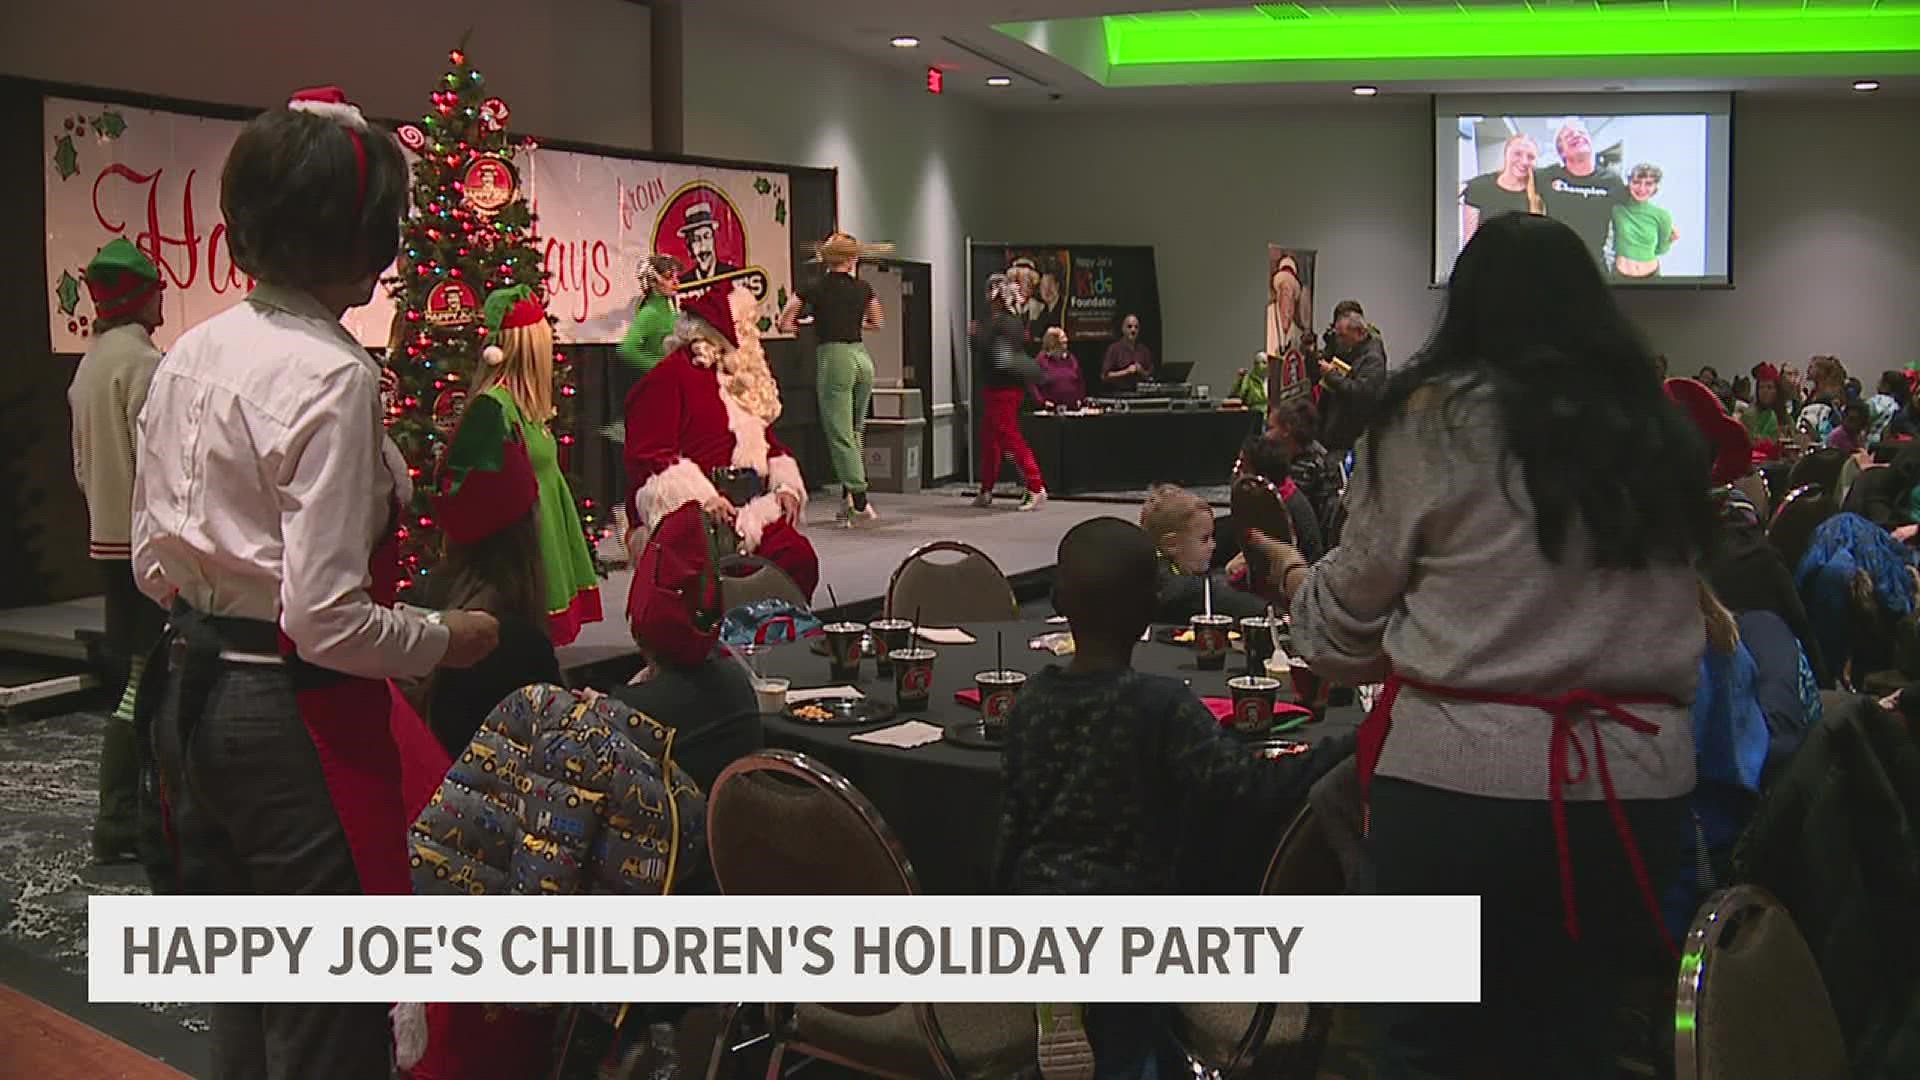 Around 1,500 kids with special needs were treated to ice cream and pizza with the return of Happy Joe's annual holiday party at the Vibrant Arena.